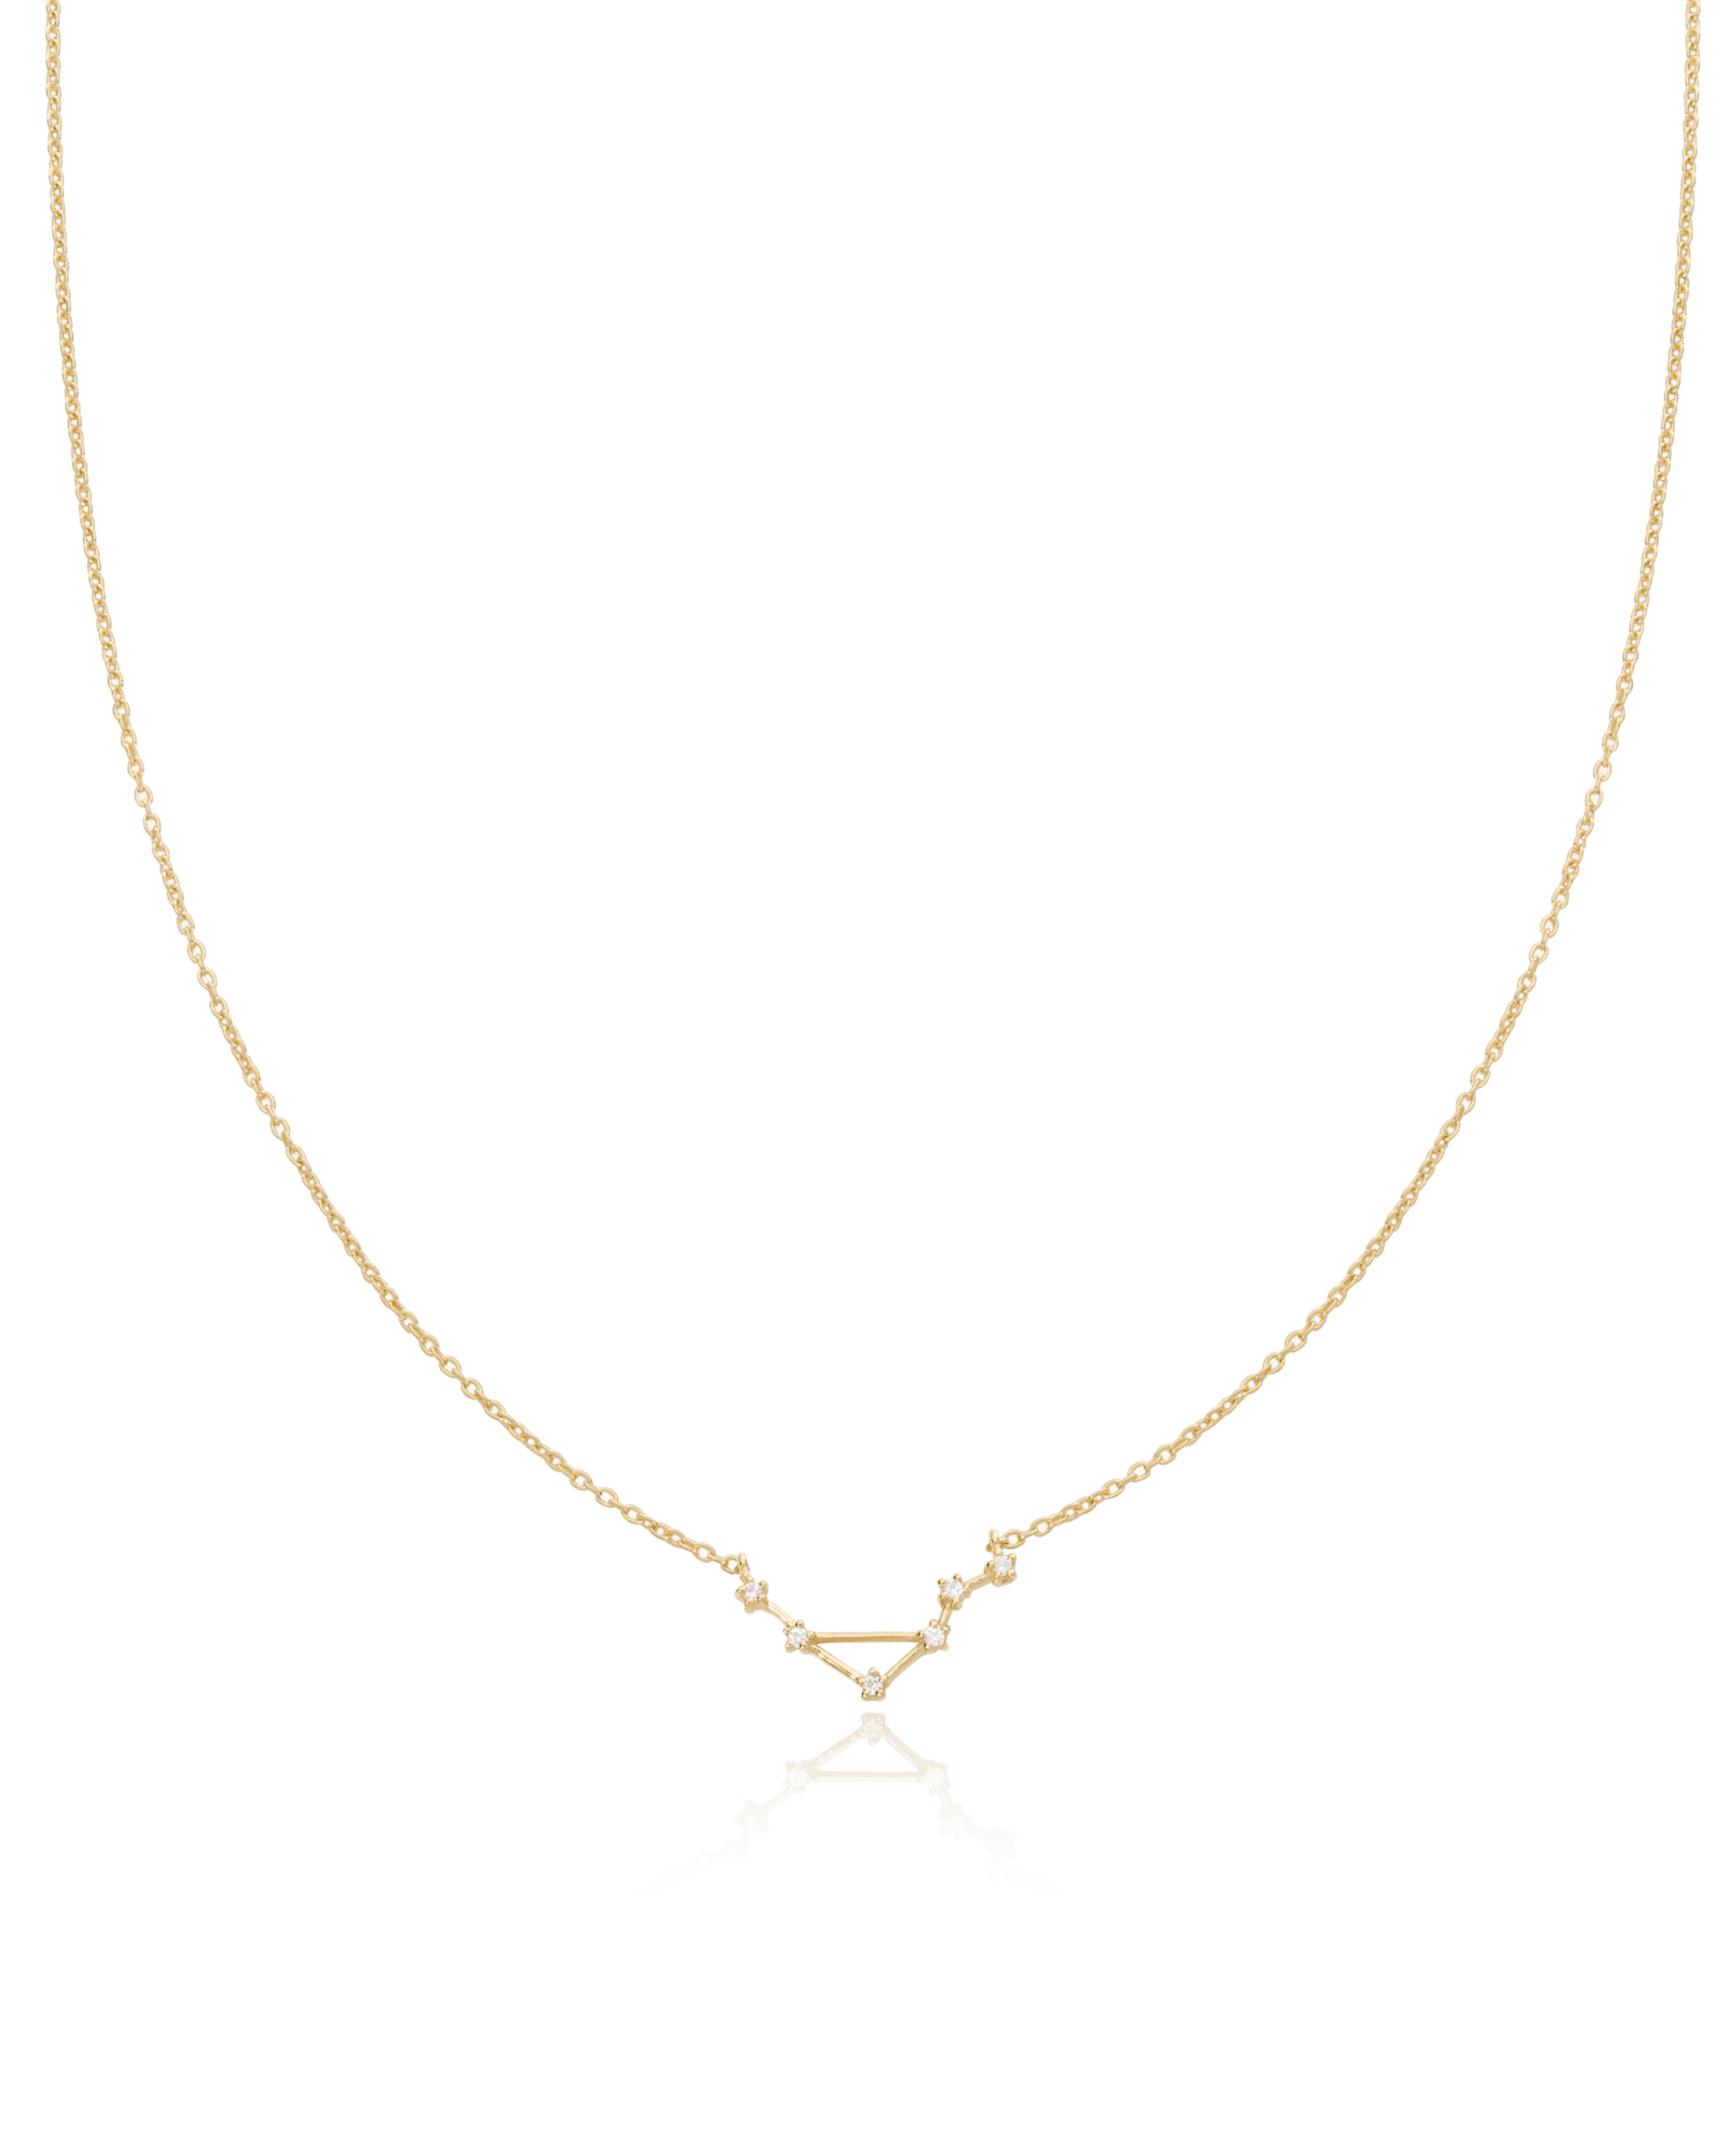 Constellation Necklace with Diamonds - 14K Yellow Gold Necklaces magal-dev 